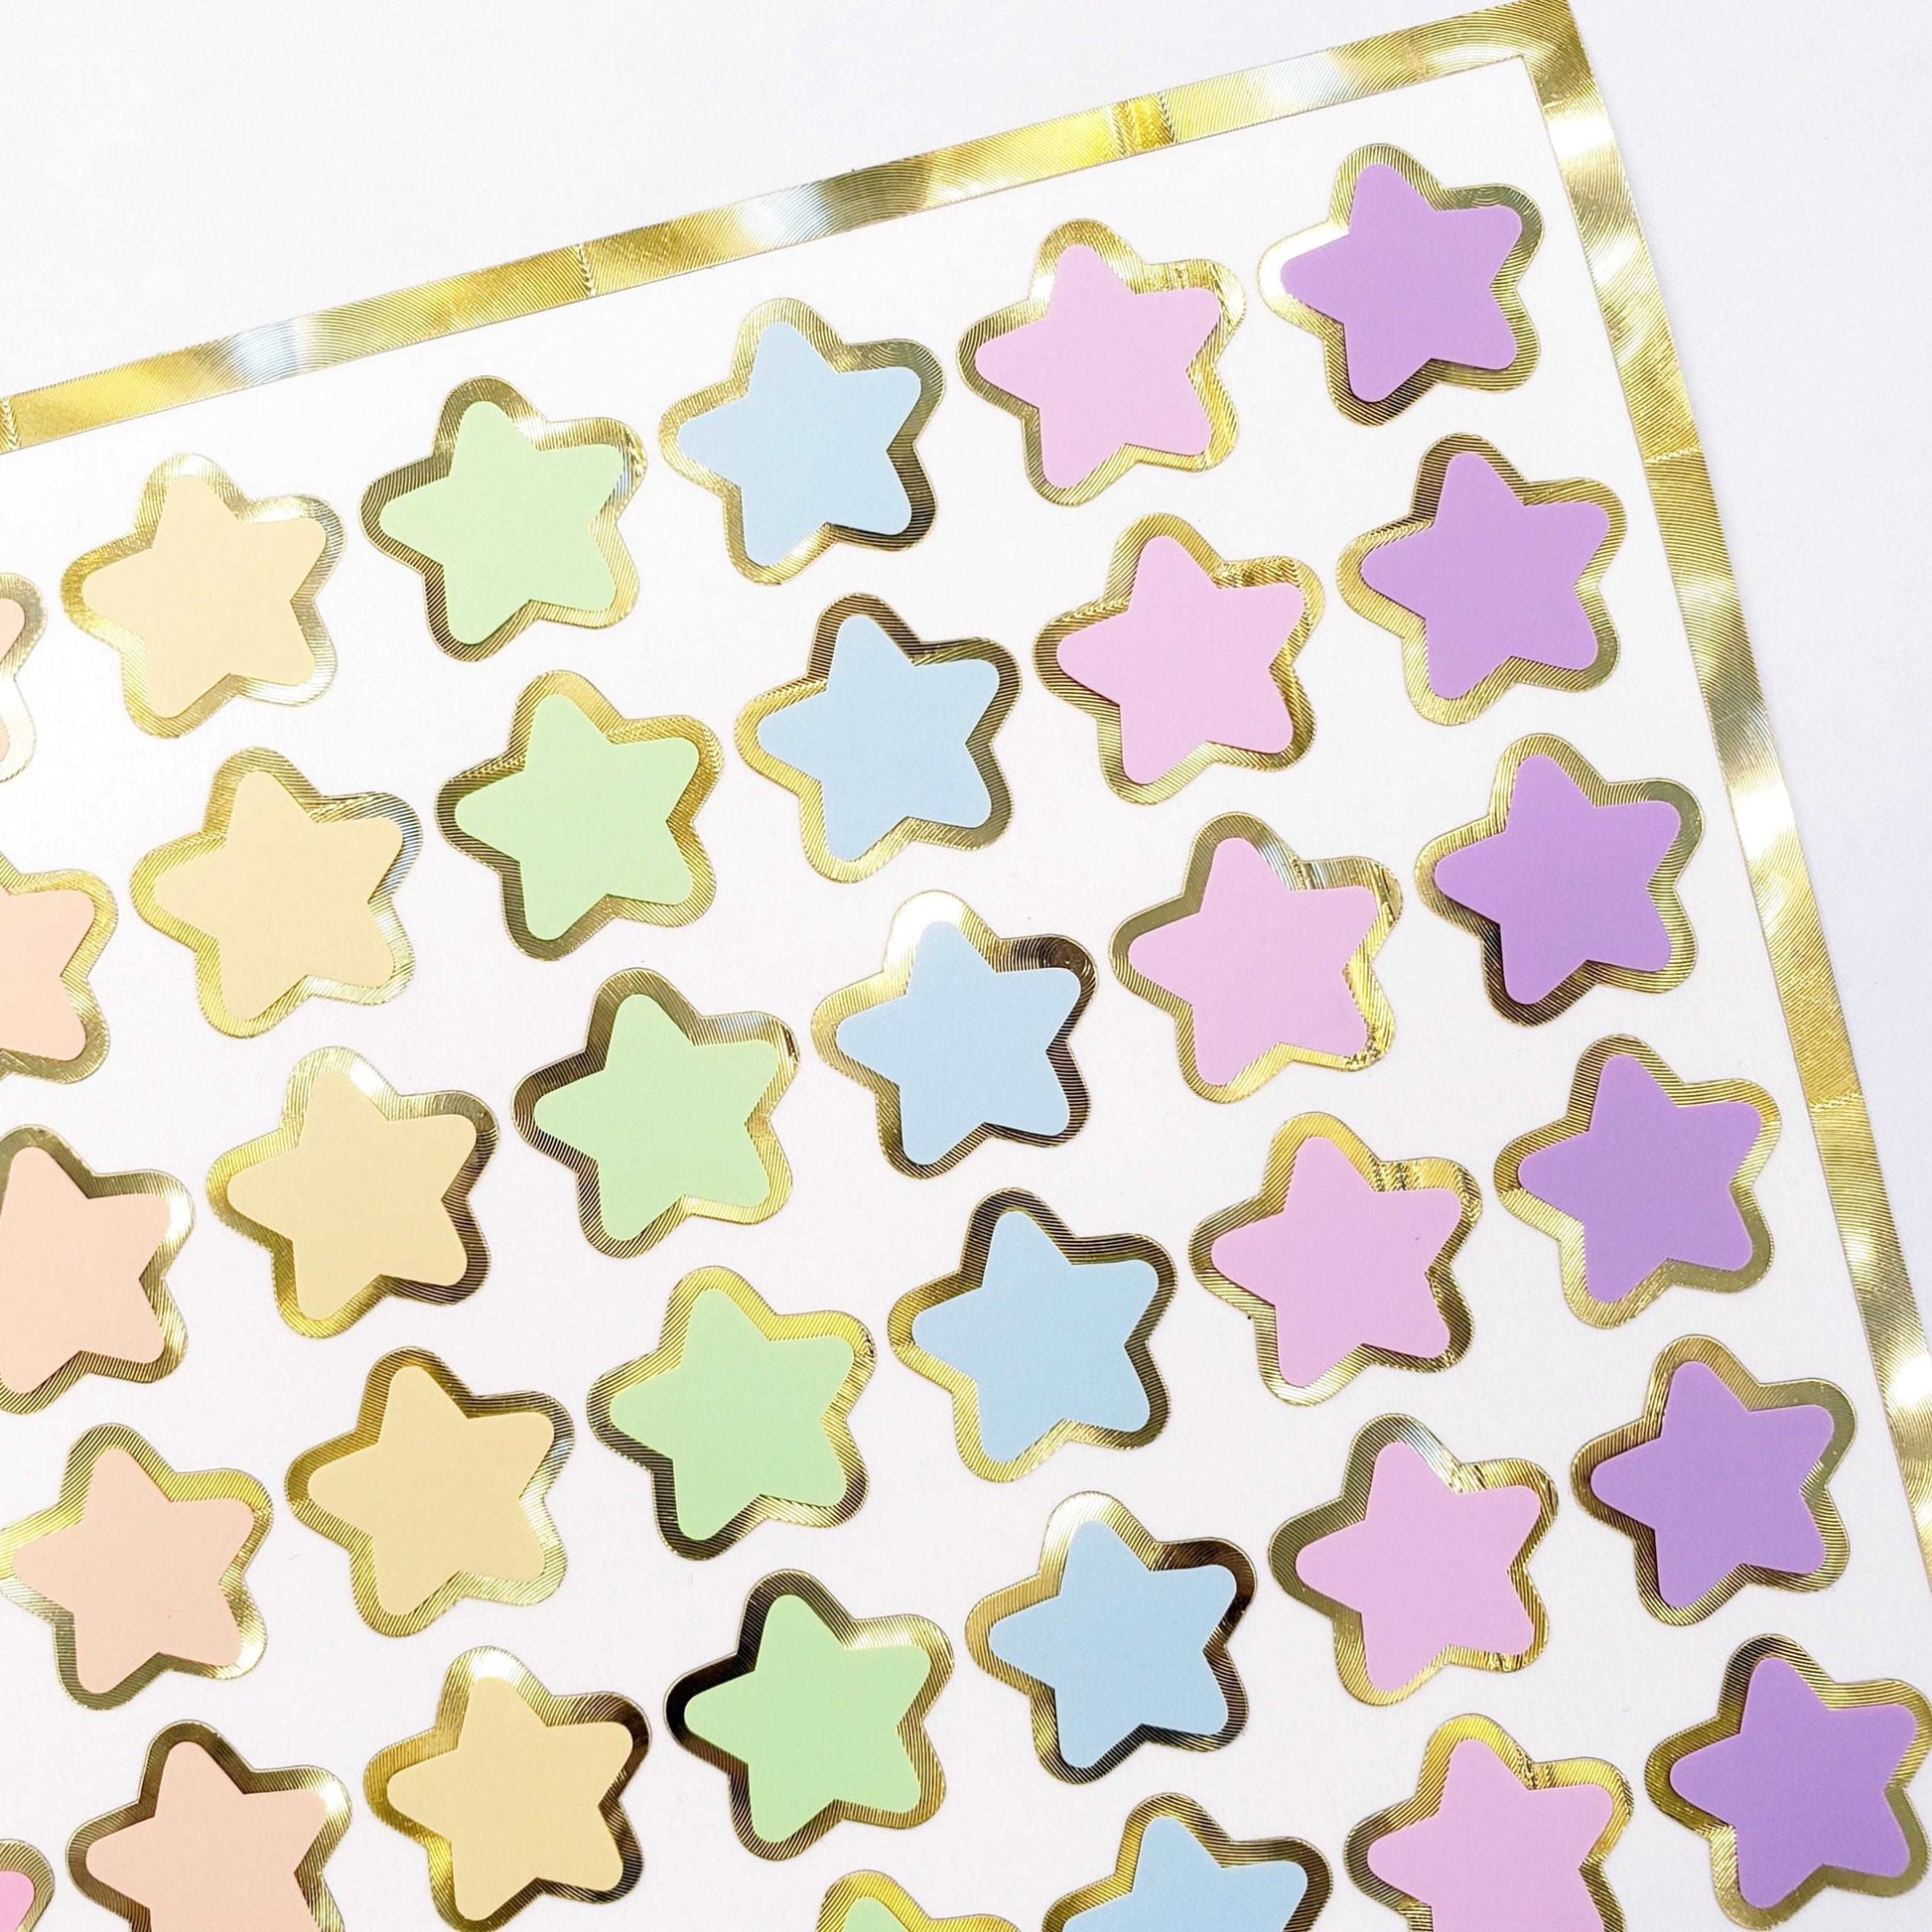 Pastel Rainbow Star Stickers, set of 70 small soft colored kawaii stars for cards, journals, envelopes, invitations, laptops and crafts.